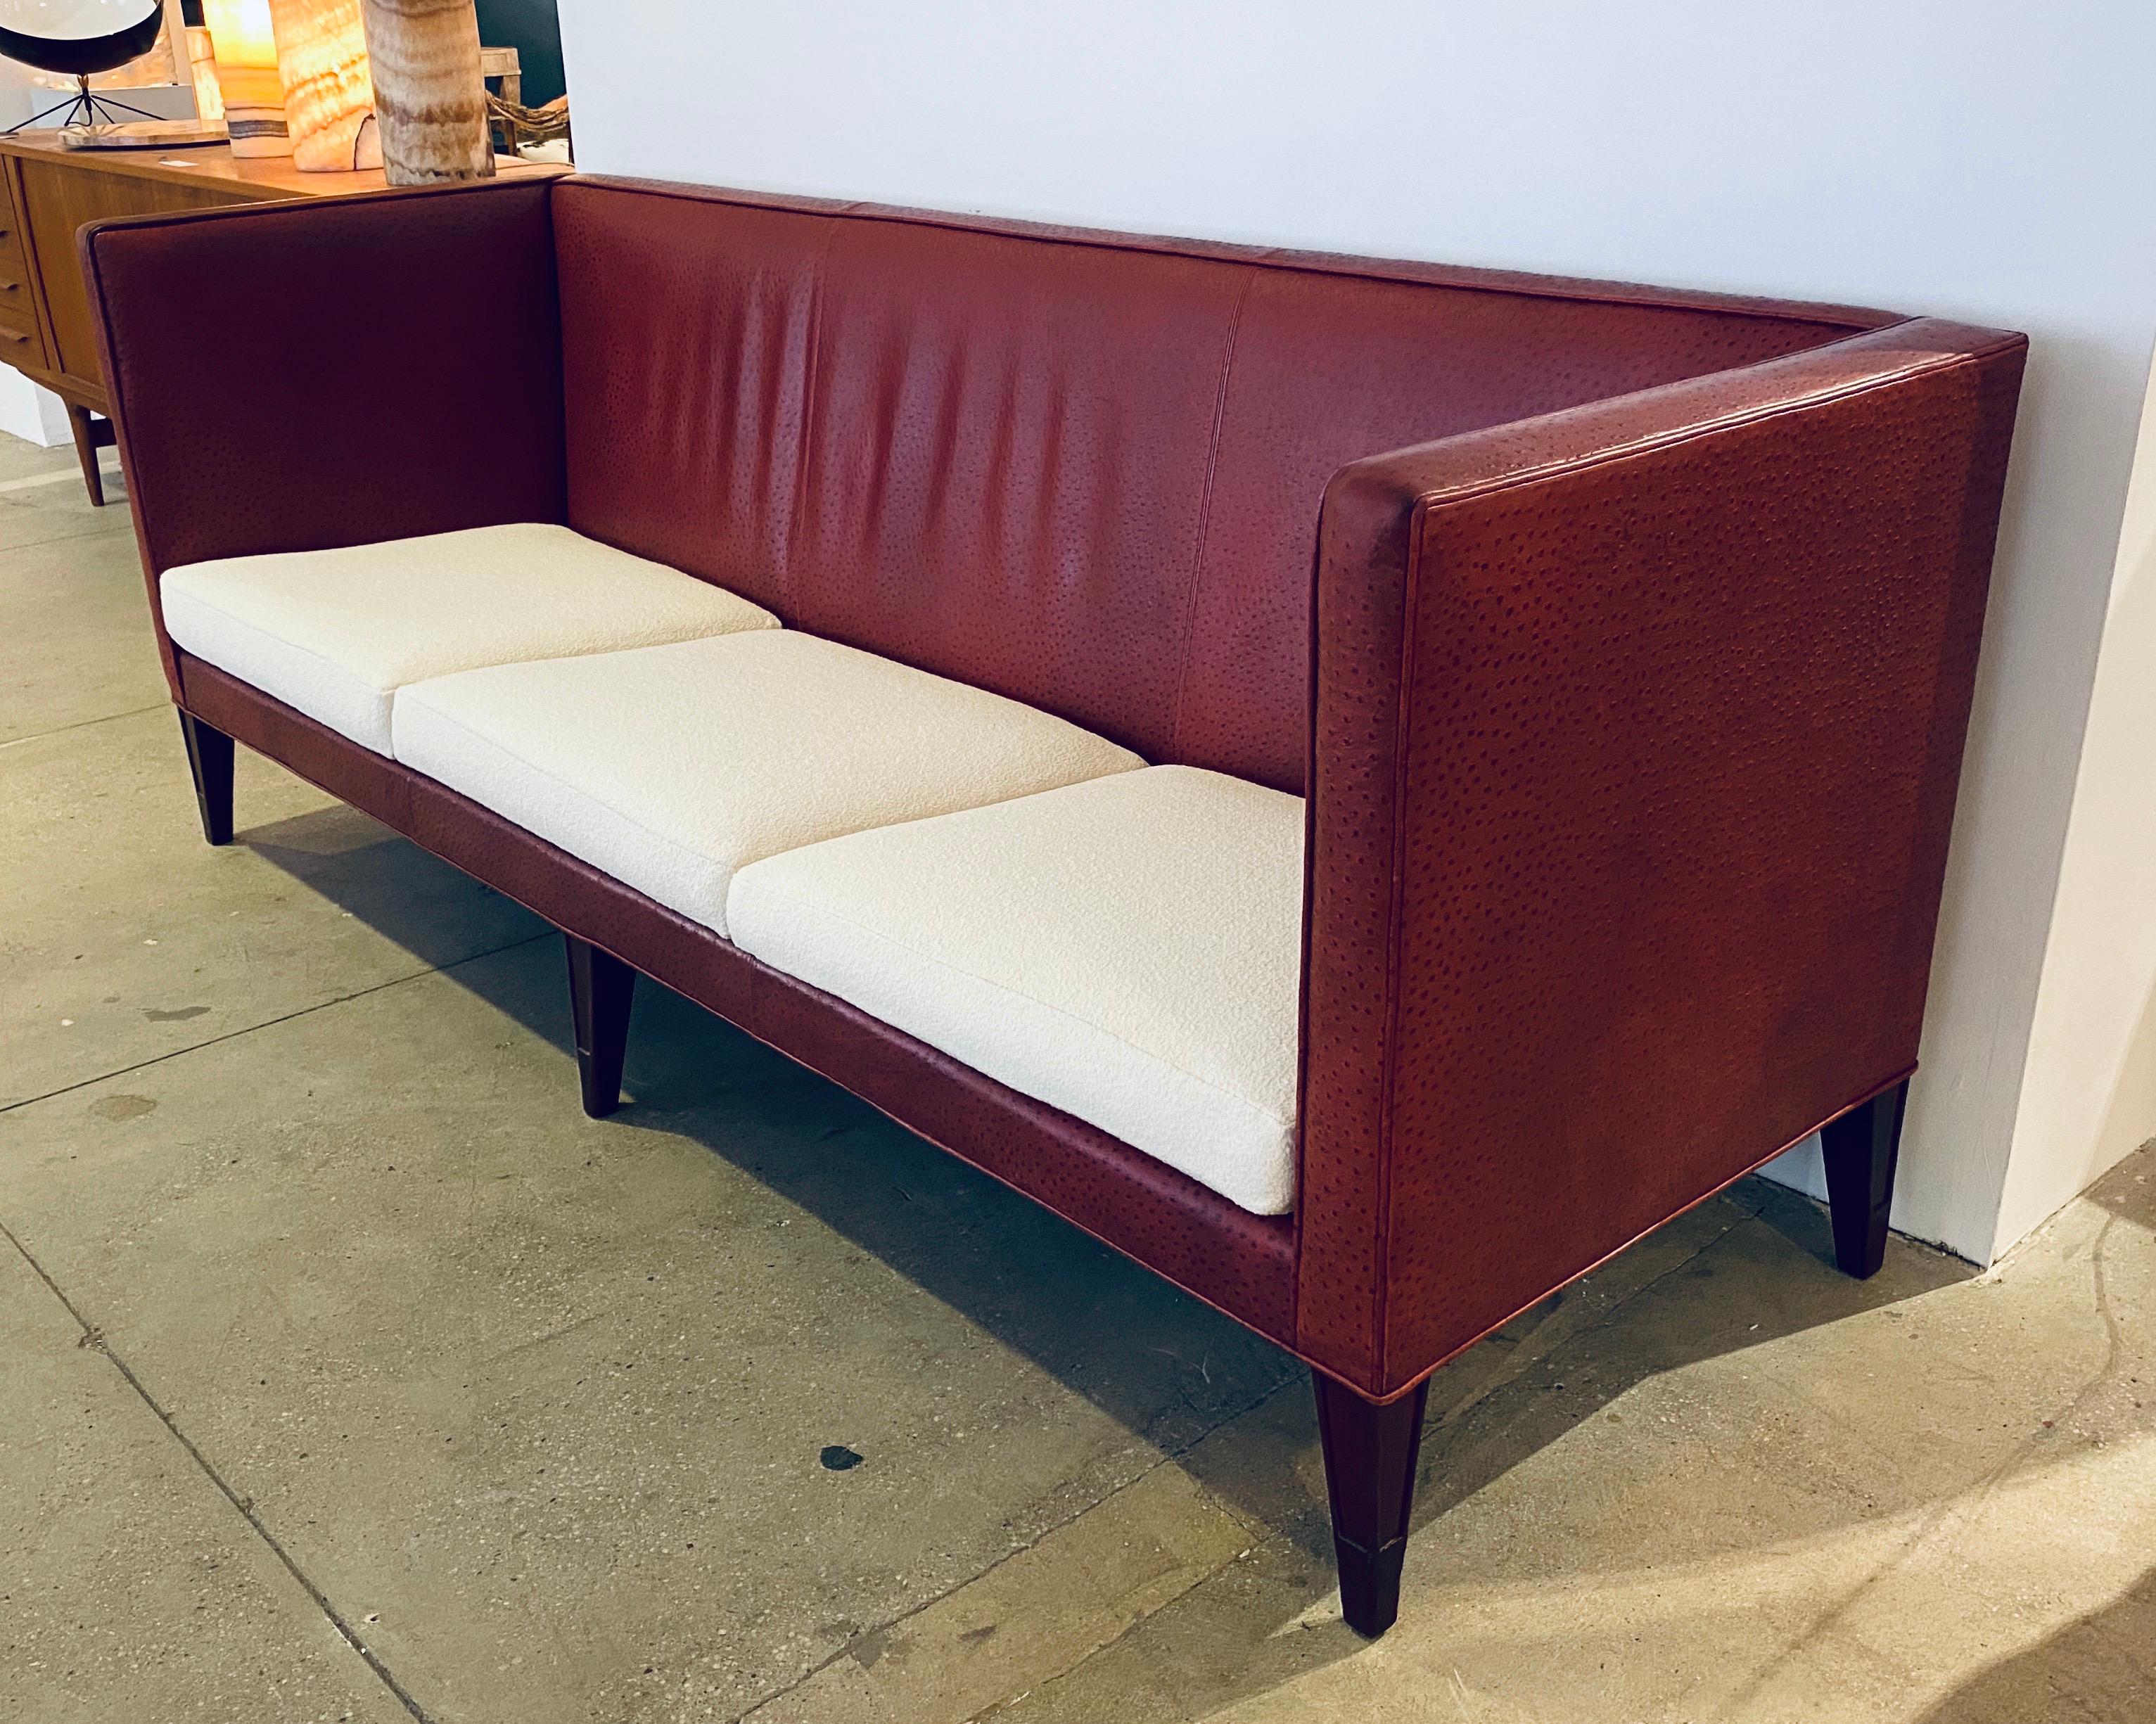 A dramatic custom long leather sofa designed by Philippe Starck for the famed redwood room of San Francisco Clift Hotel. The sofa has reddish ostrich embossed leather frame with newly upholstered Knoll bouclé cushions.